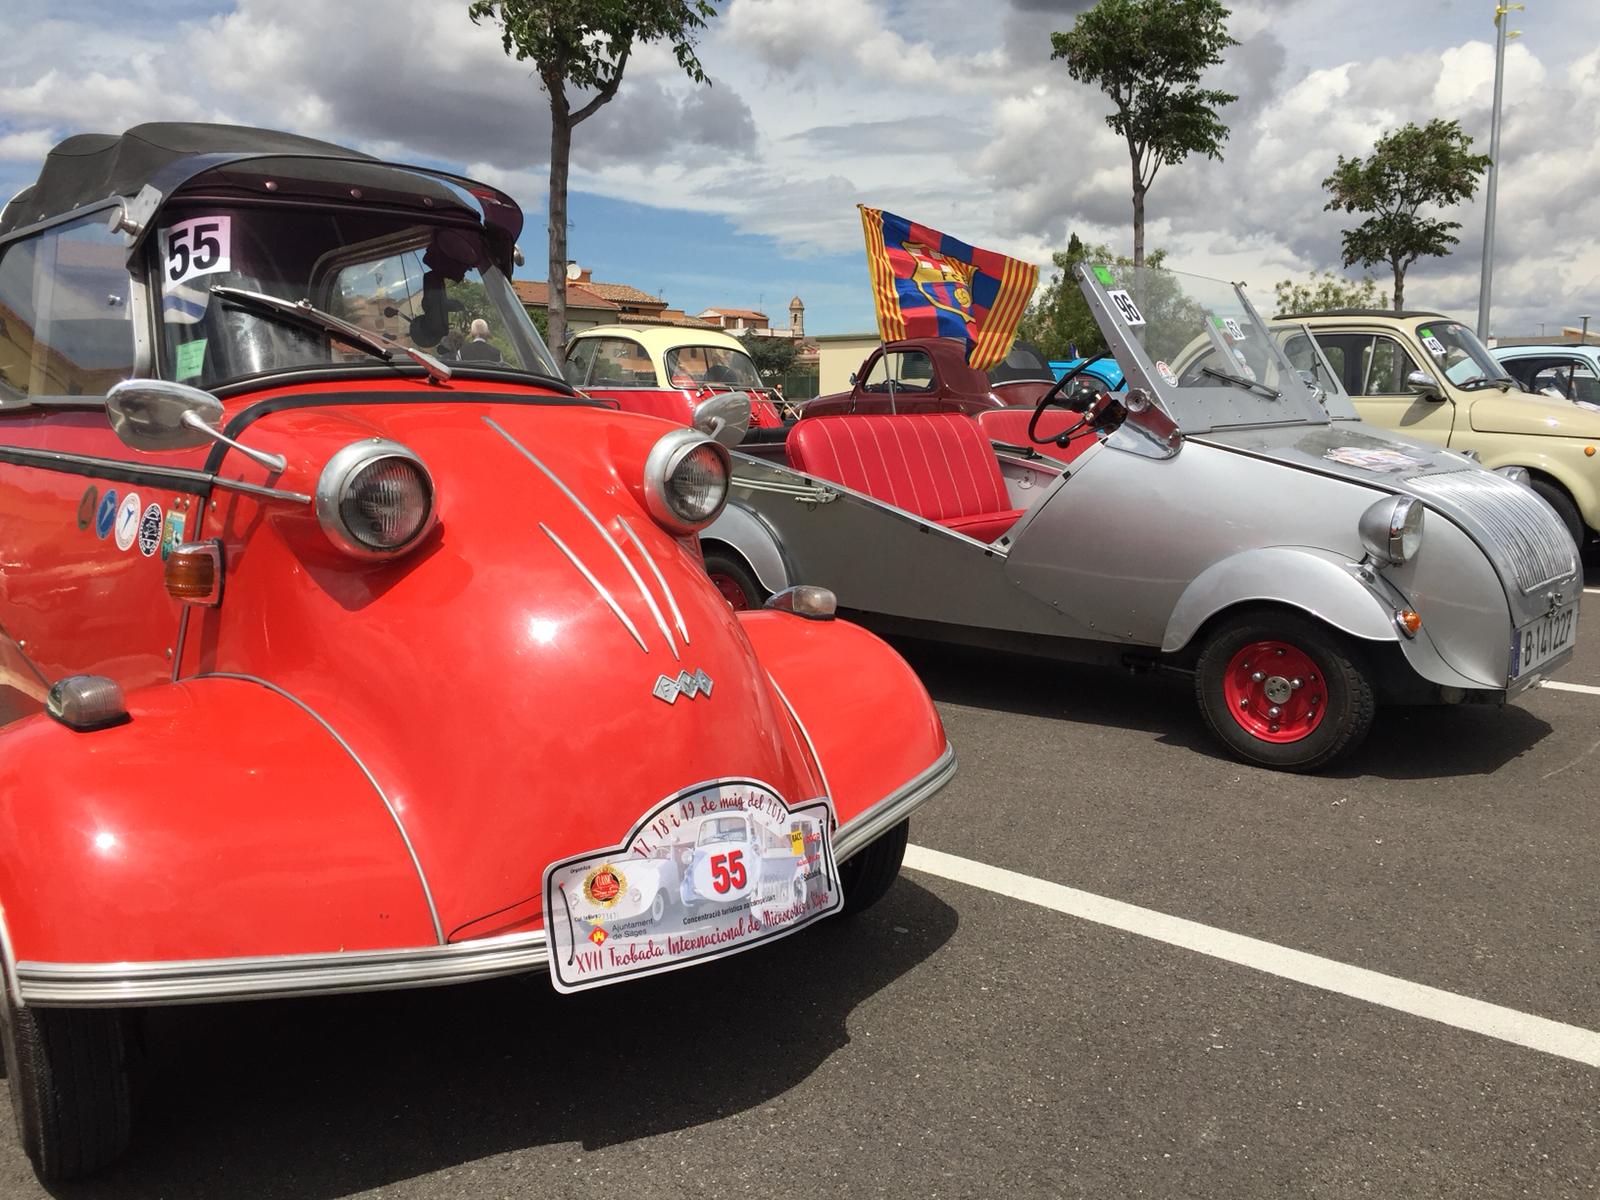 bubblecars and microcars